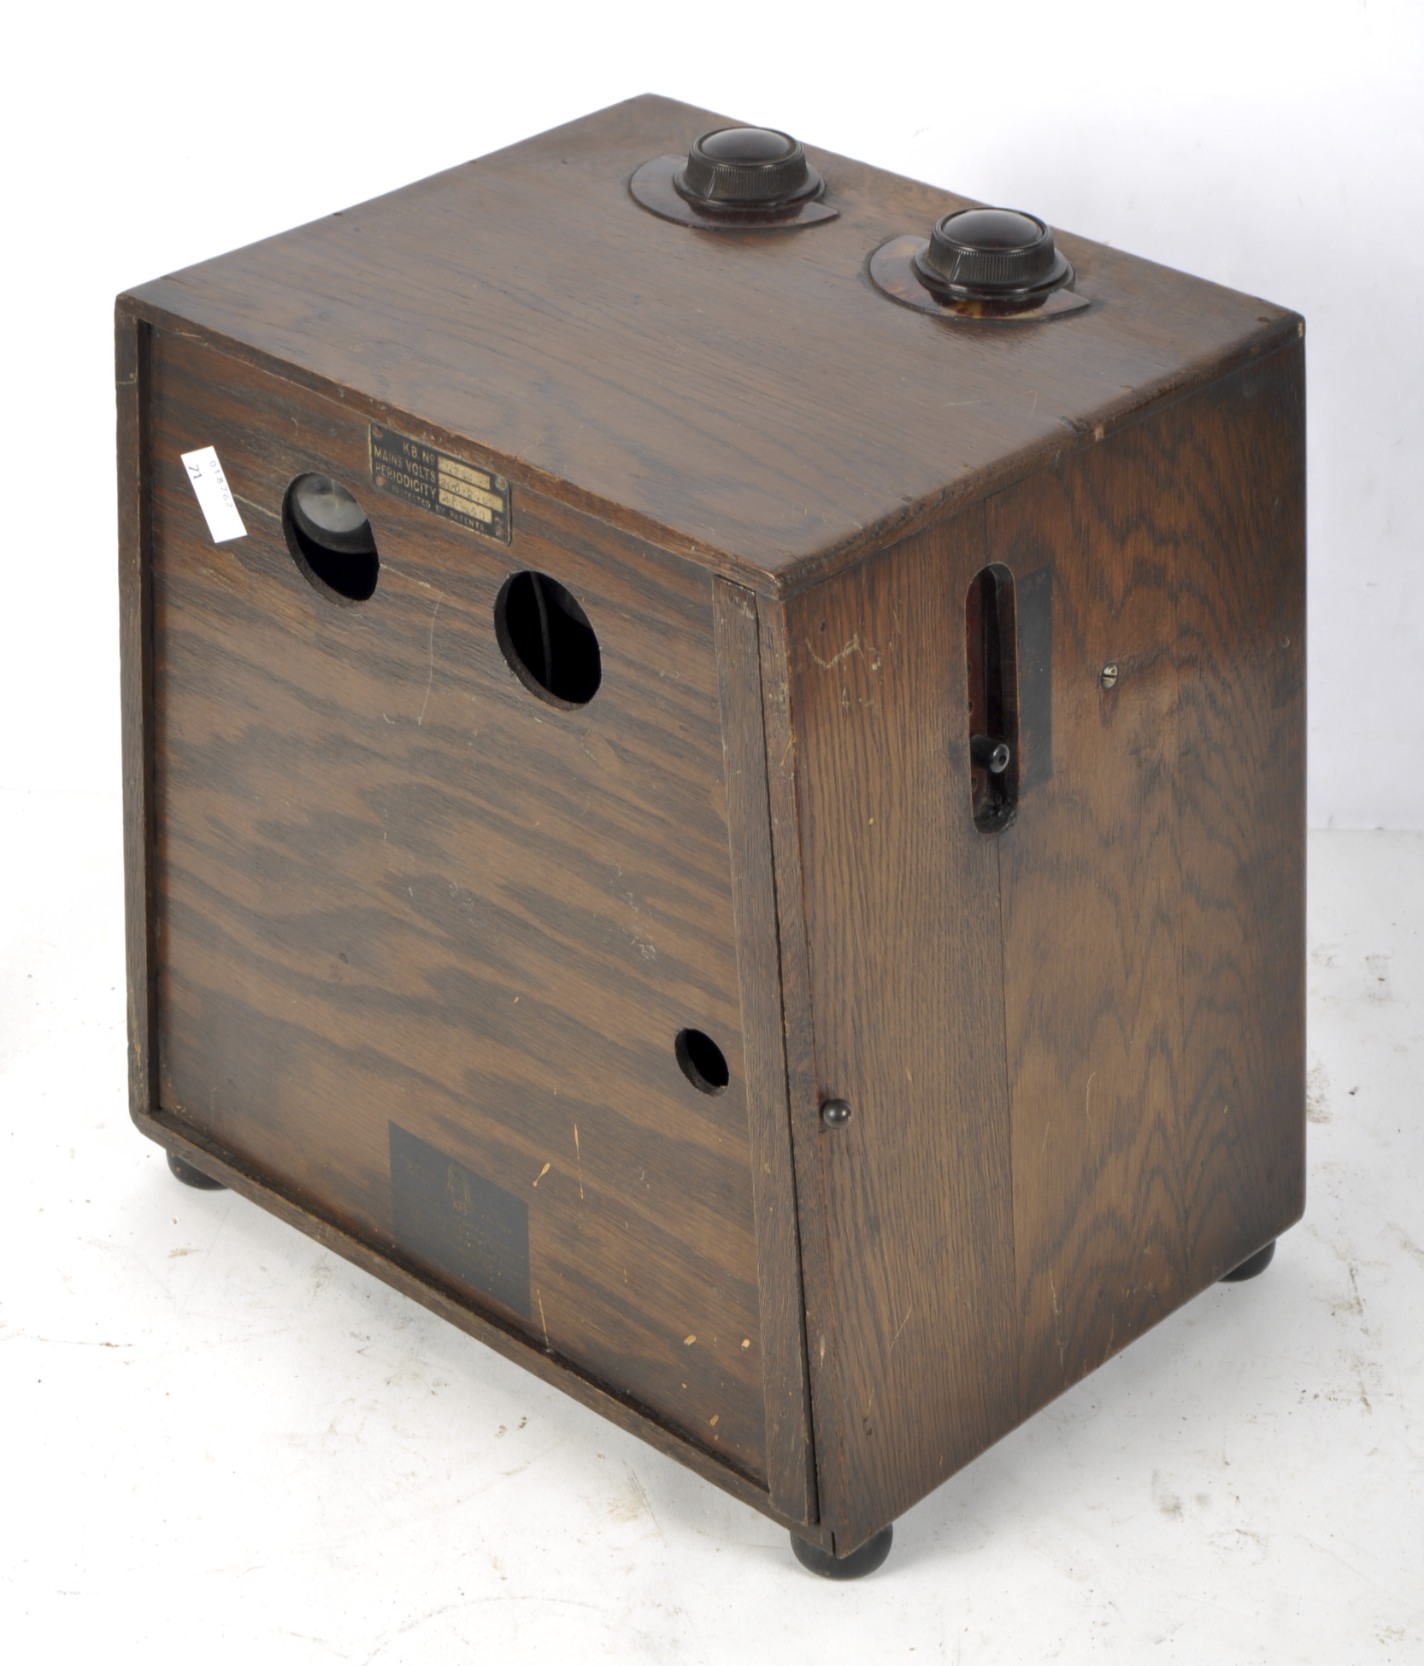 An early 20th century Kolster Brandes Ltd (KB) radio receiver, No 253 'Pup', - Image 3 of 5